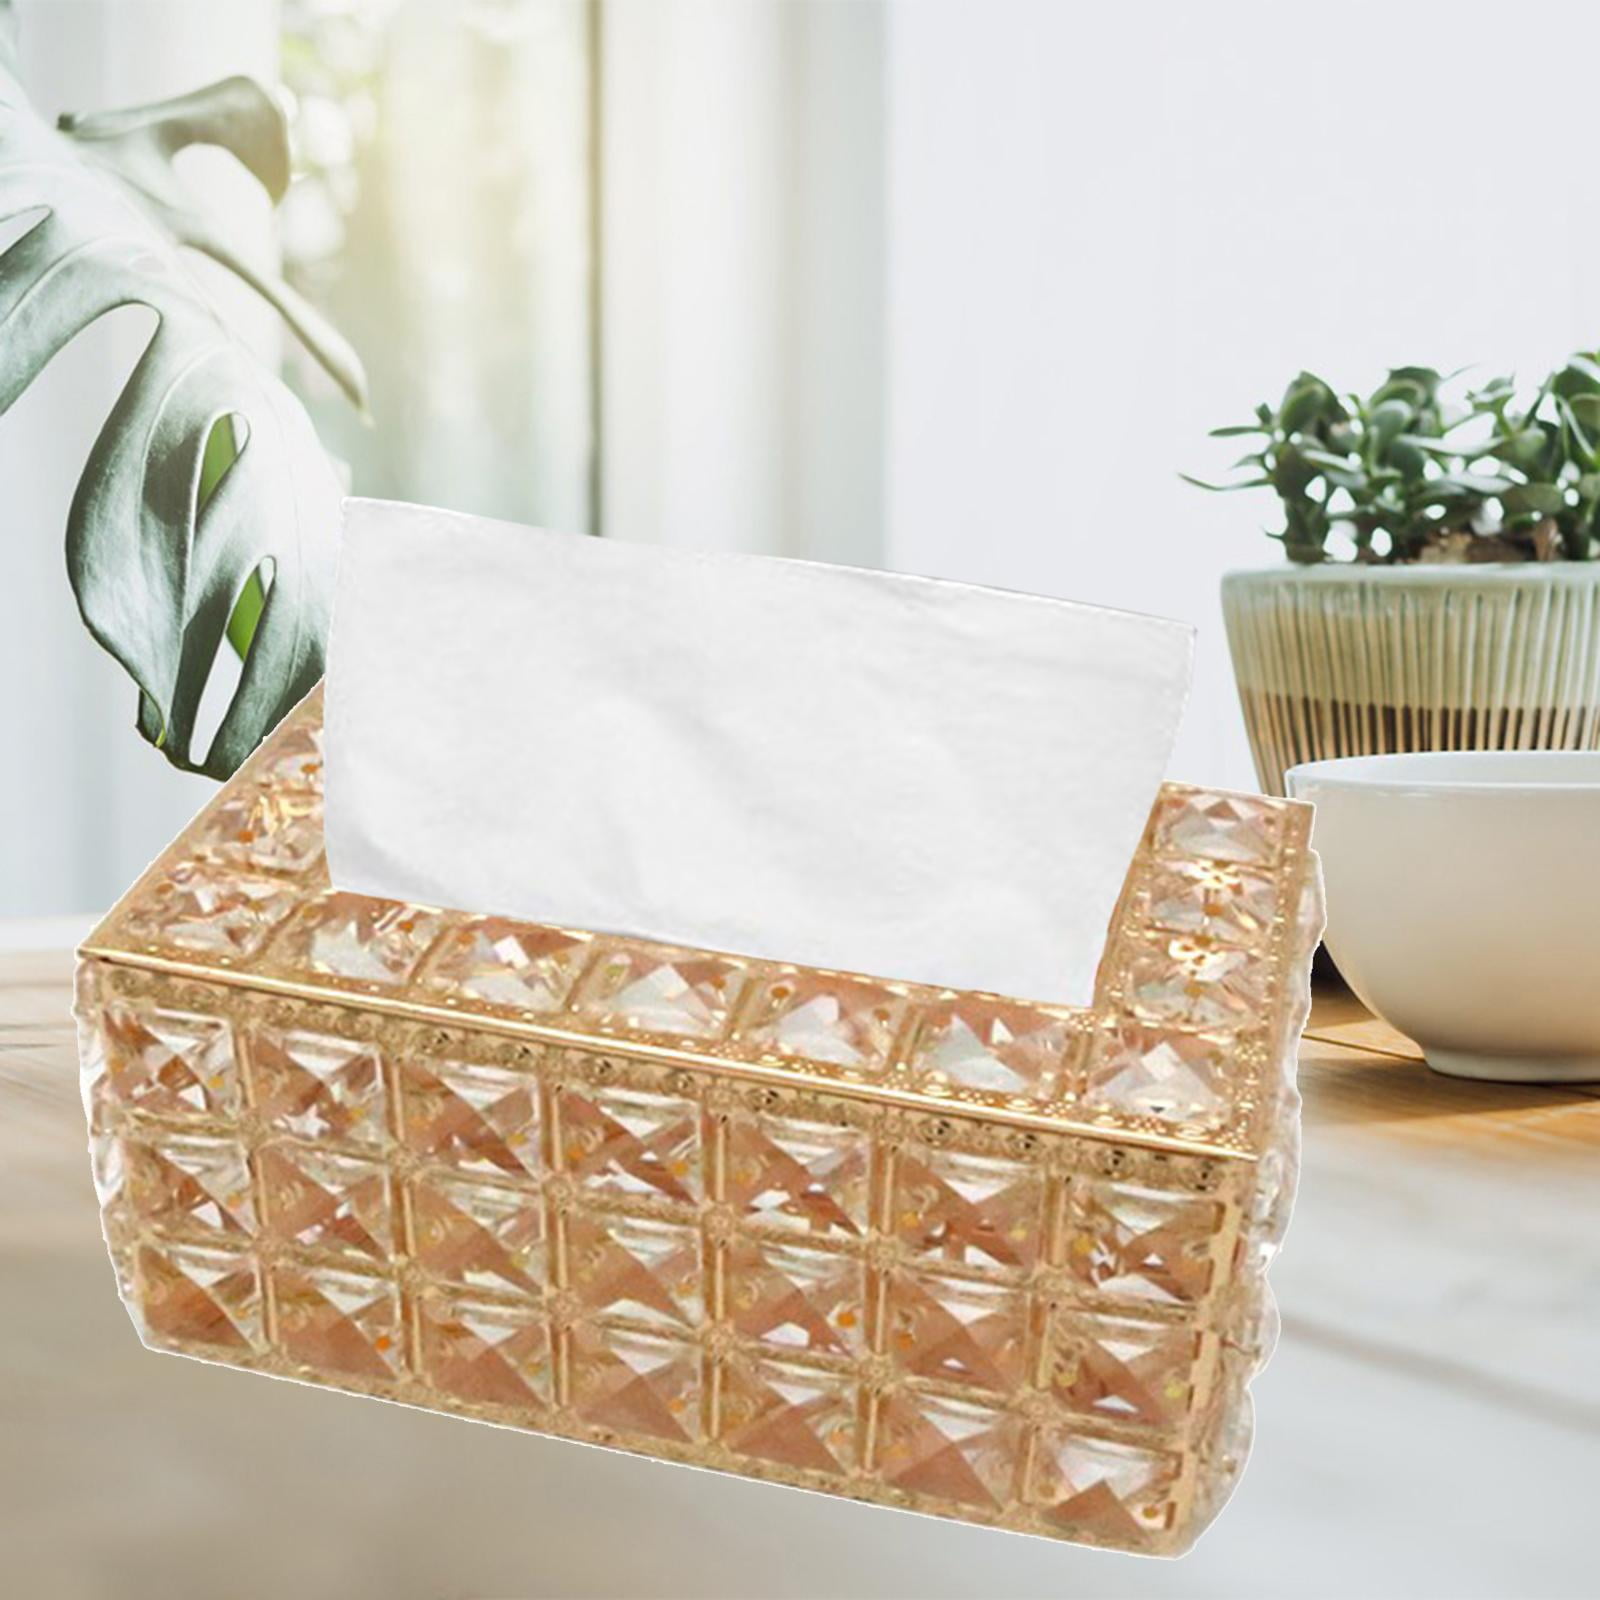 aoory Crystal Tissue Box Cover Cylindrical Decorative Tissue Box Cover Tissue Holder Crystal Napkins Box for Elegant Decor 